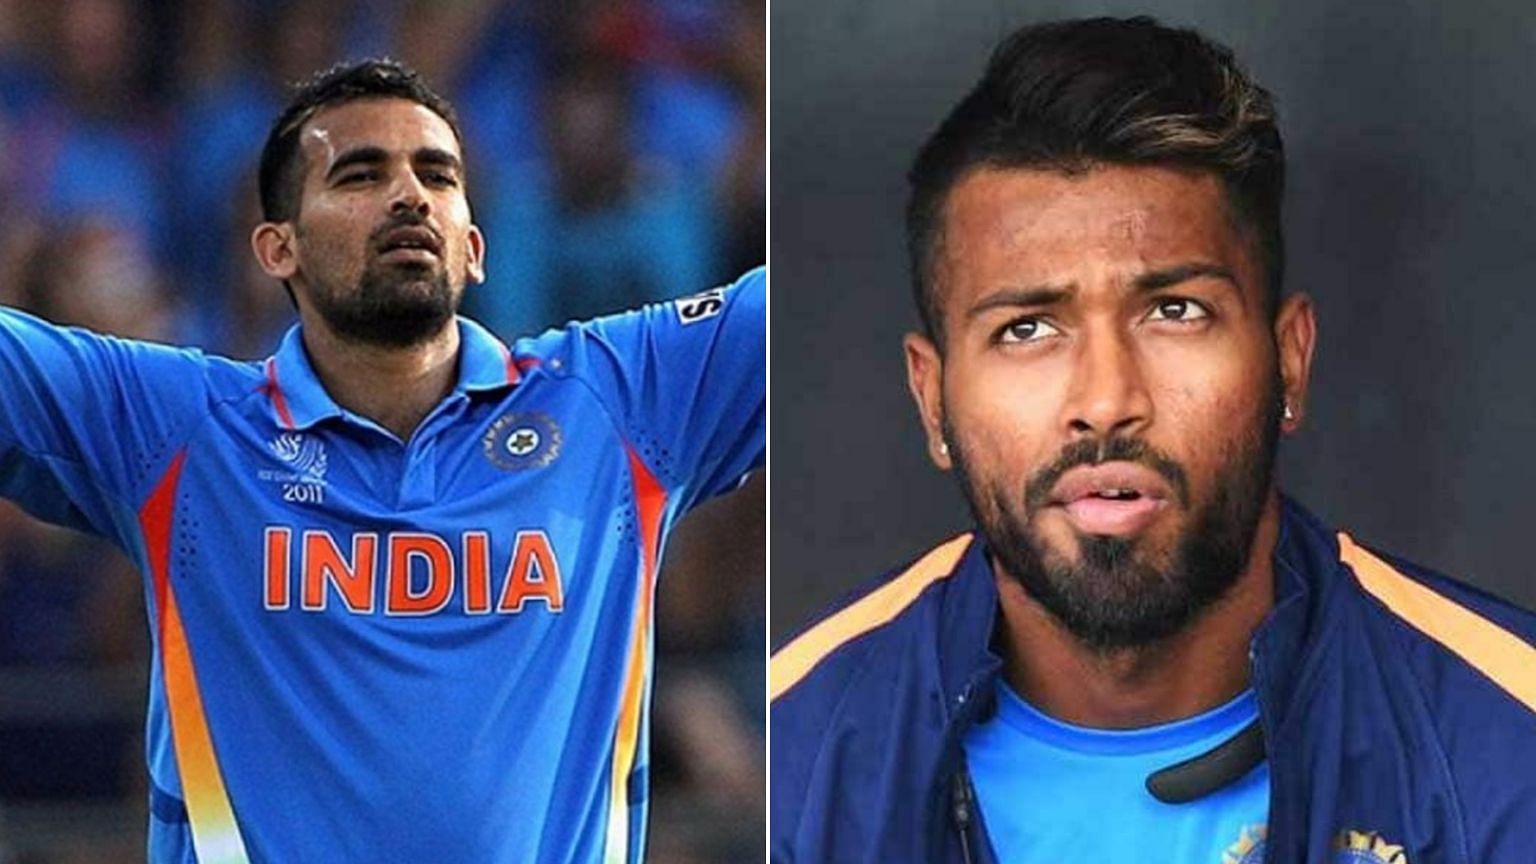 Hardik Pandya’s wish to Zaheer garnered a lot of attention and didn’t go down well with cricket fans.